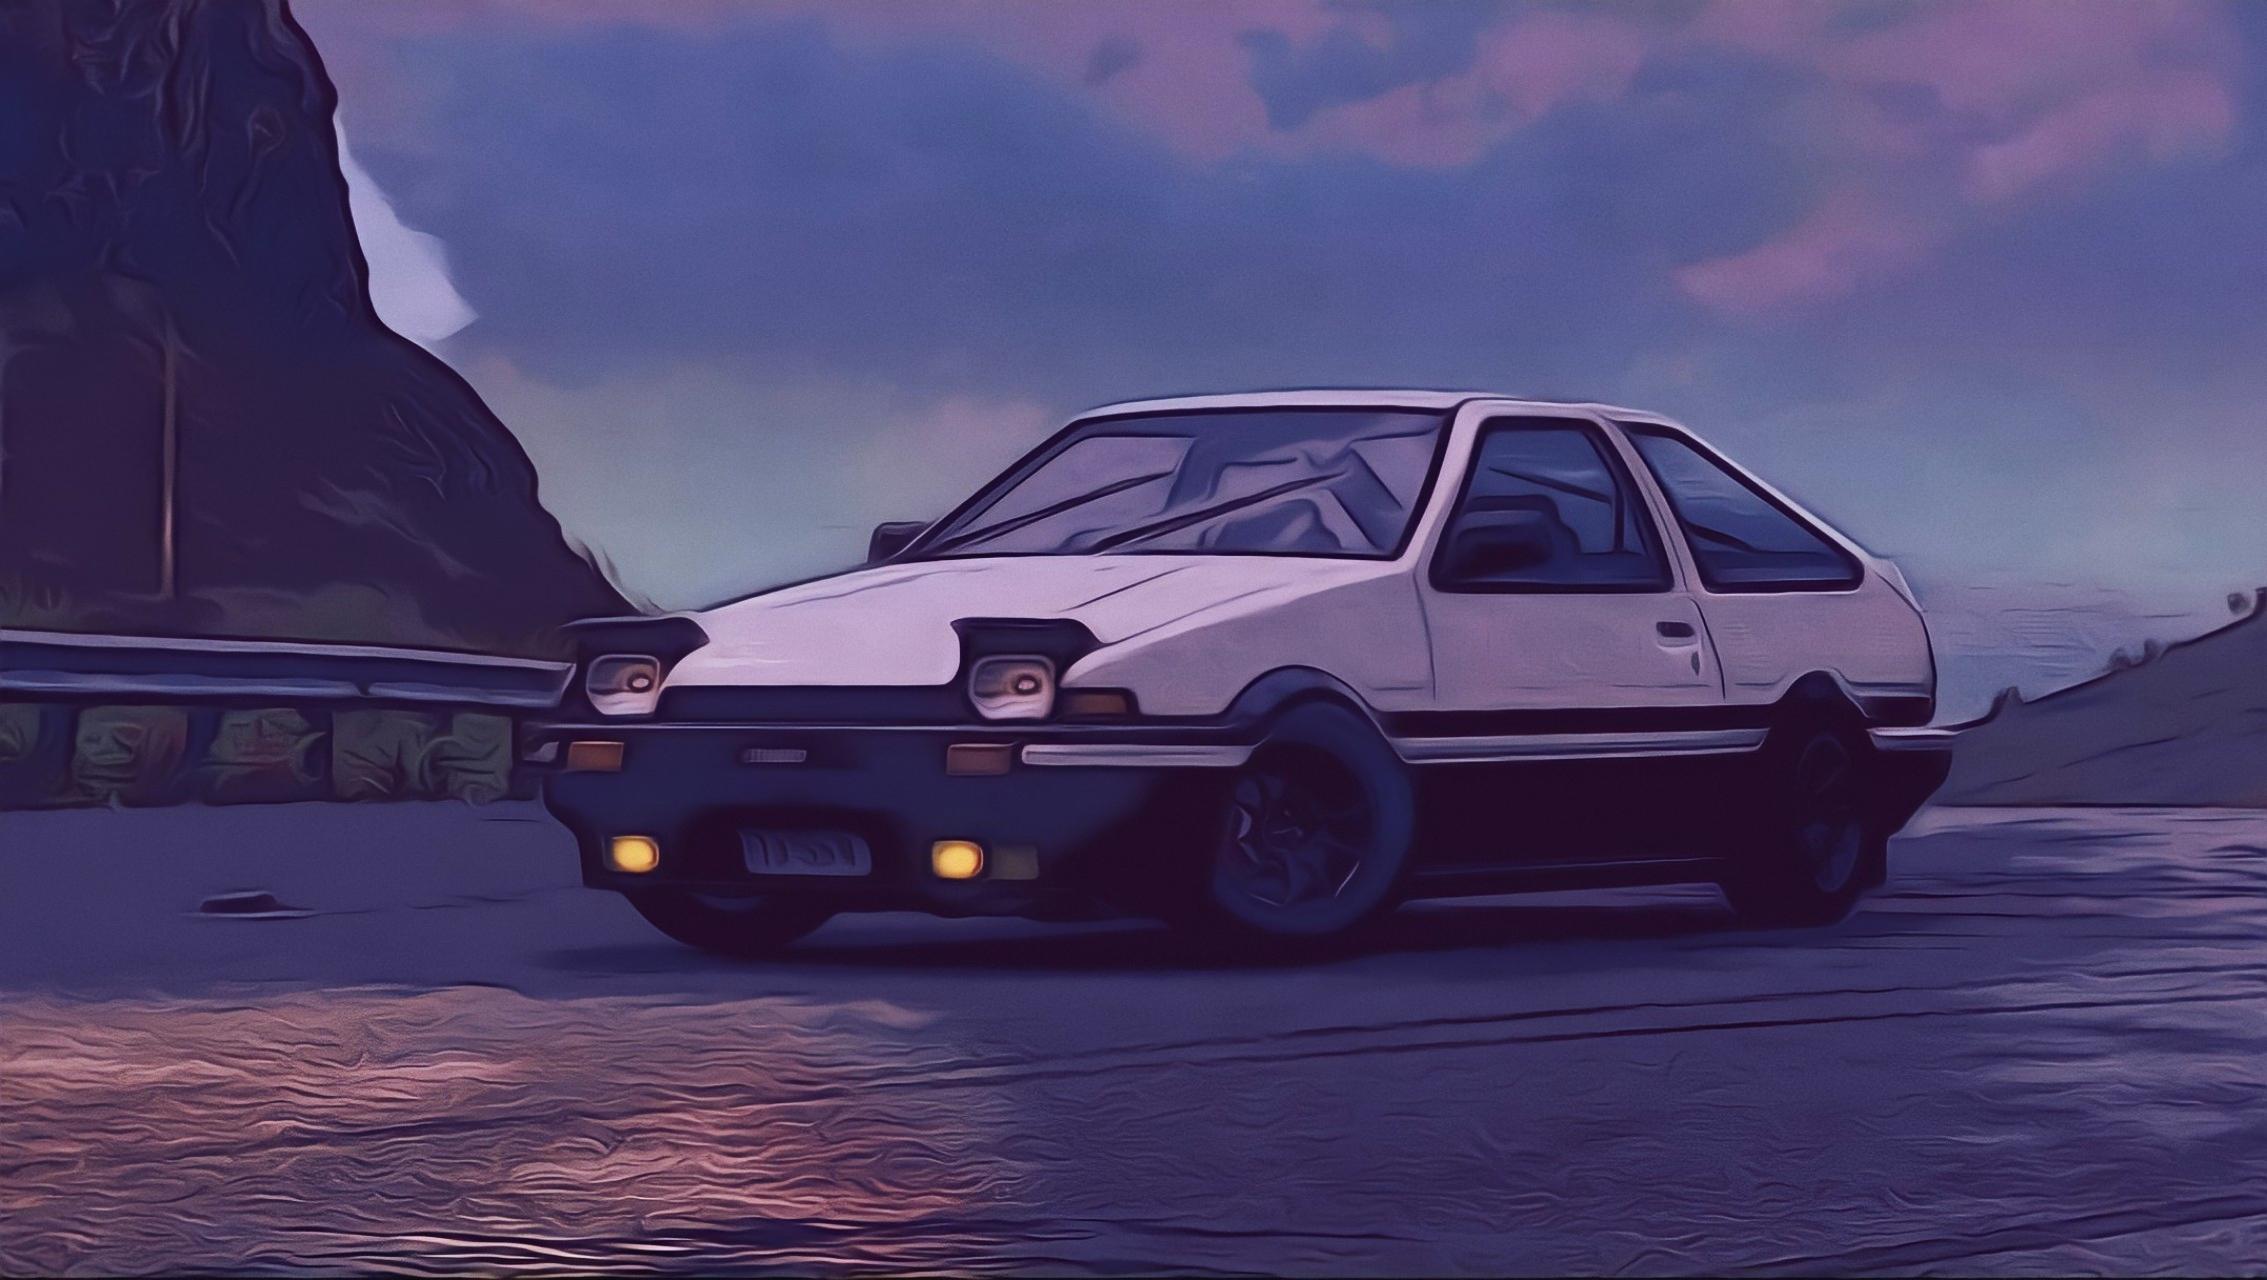 Ae86 Wallpapers 4k Hd Ae86 Backgrounds On Wallpaperbat | Images and ...